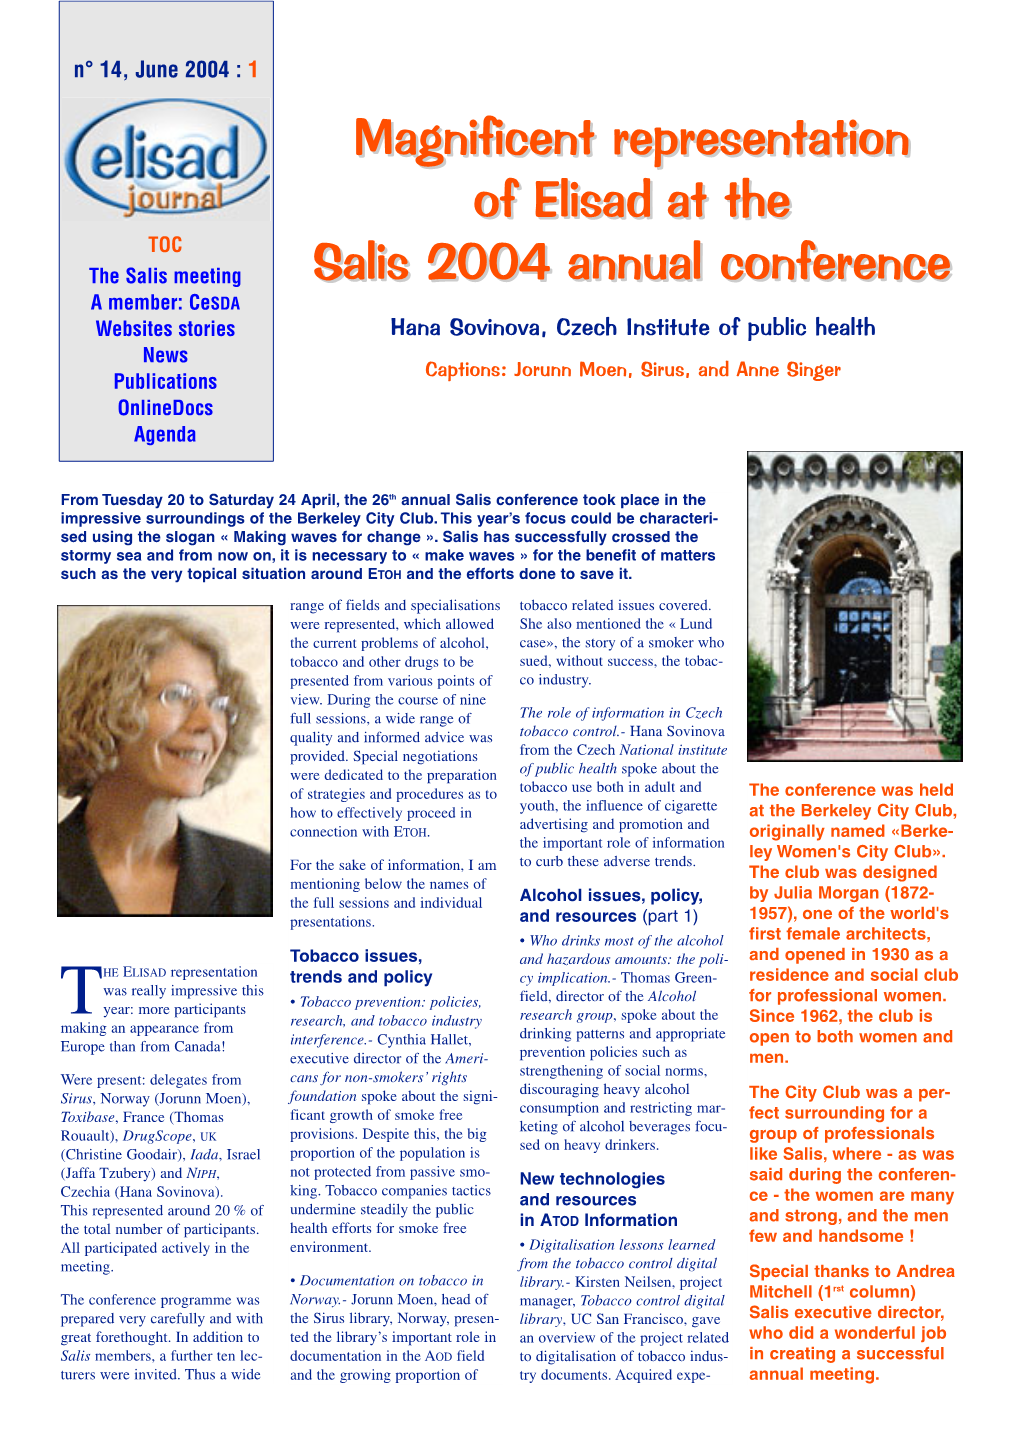 Magnificent Representation of Elisad at the Salis 2004 Annual Conference